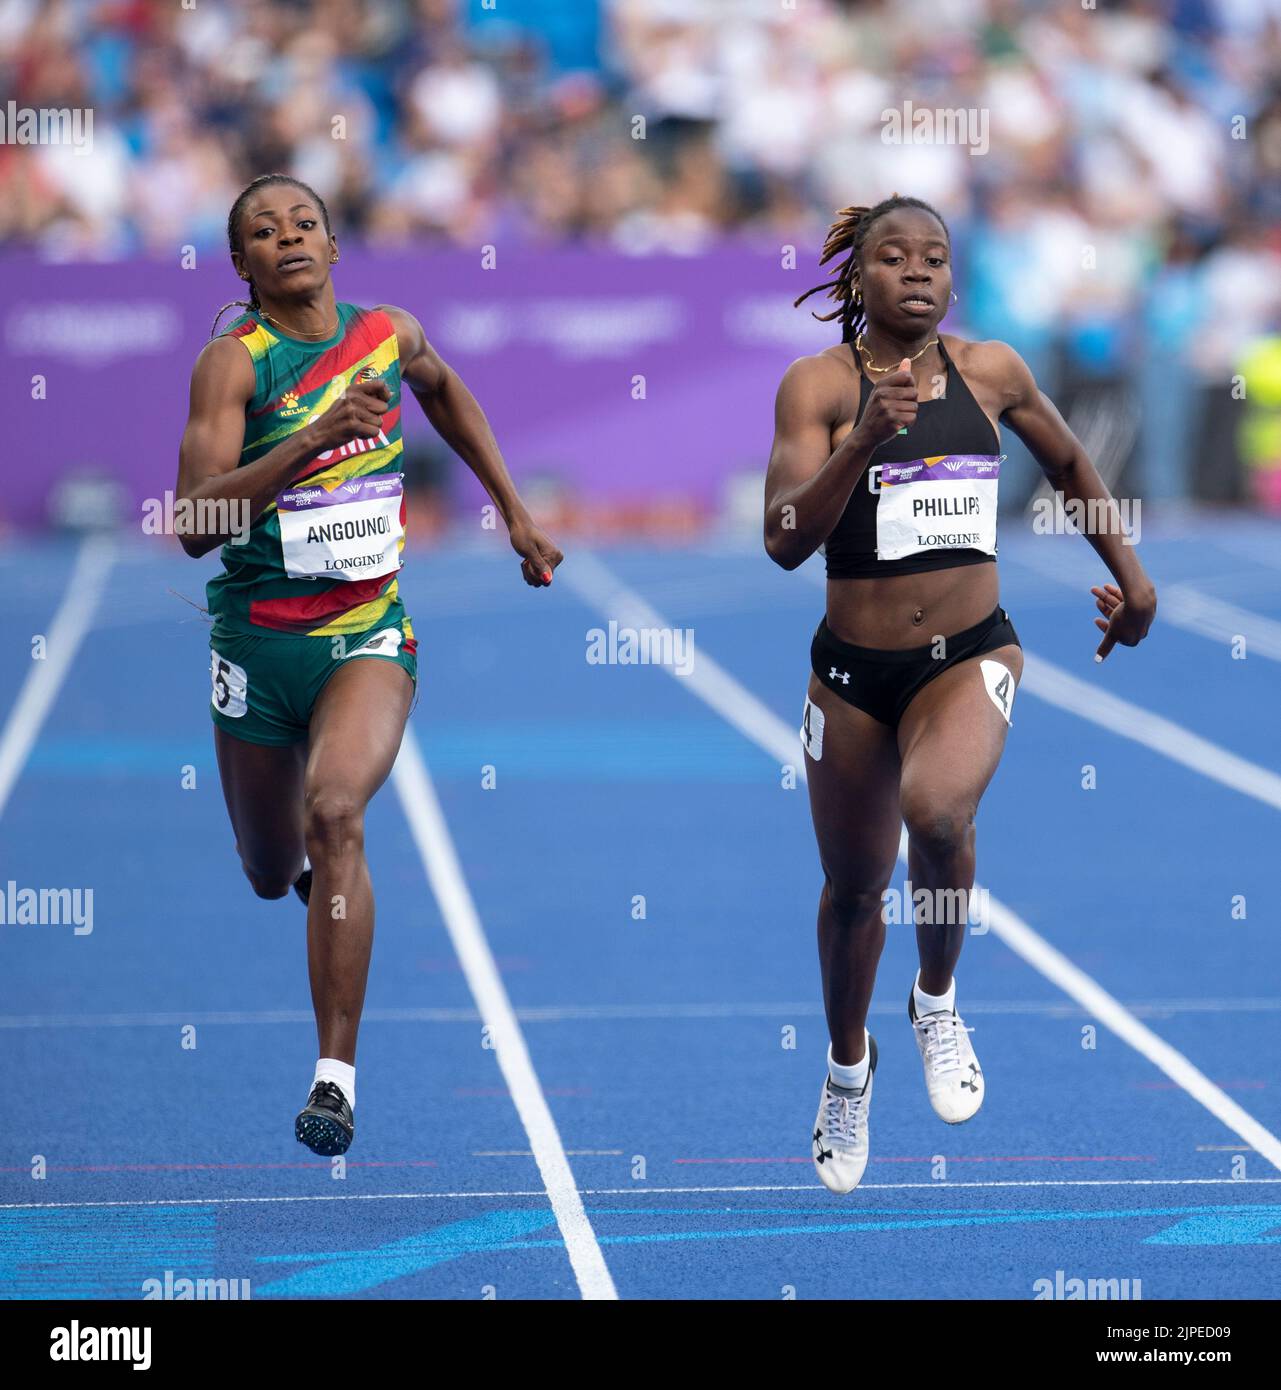 Linda Angounou and Kenisha Phillips competing in the women’s 200m heats at Commonwealth Games at Alexander Stadium, Birmingham, England, on 4th August Stock Photo